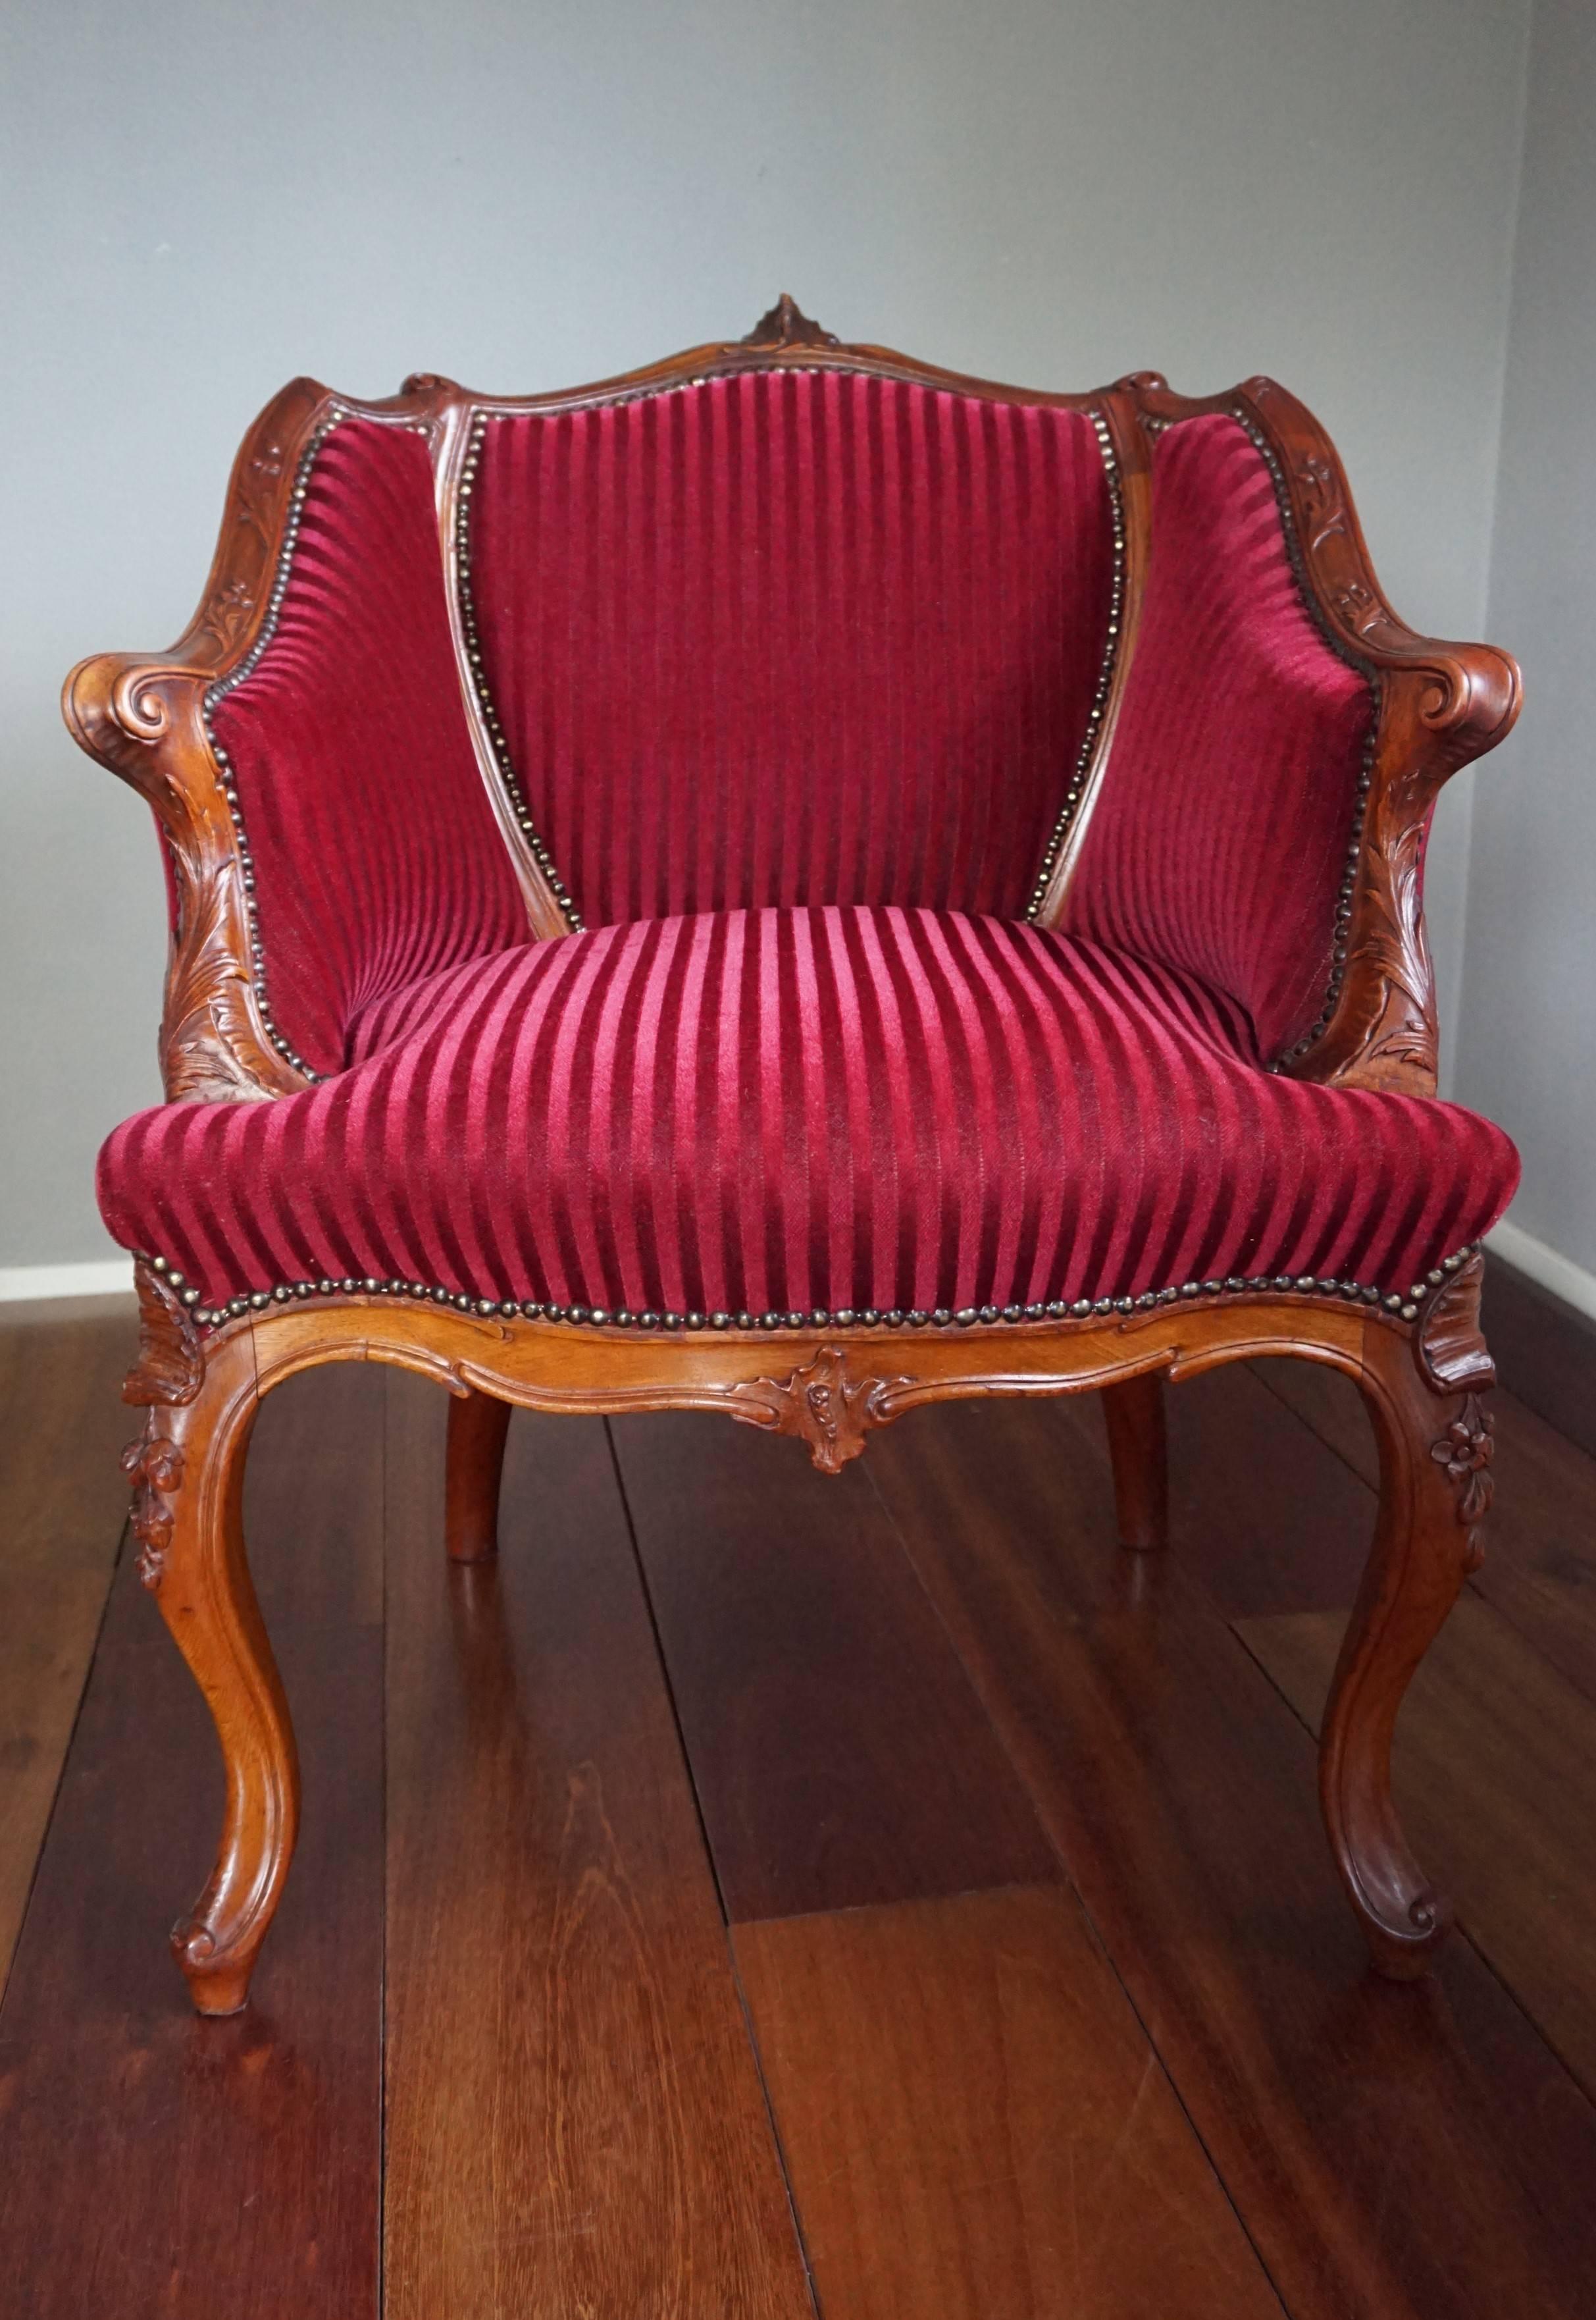 Hand-Crafted Antique and Stunning 19th Century Hand-Carved Mahogany and Red Velour Chair